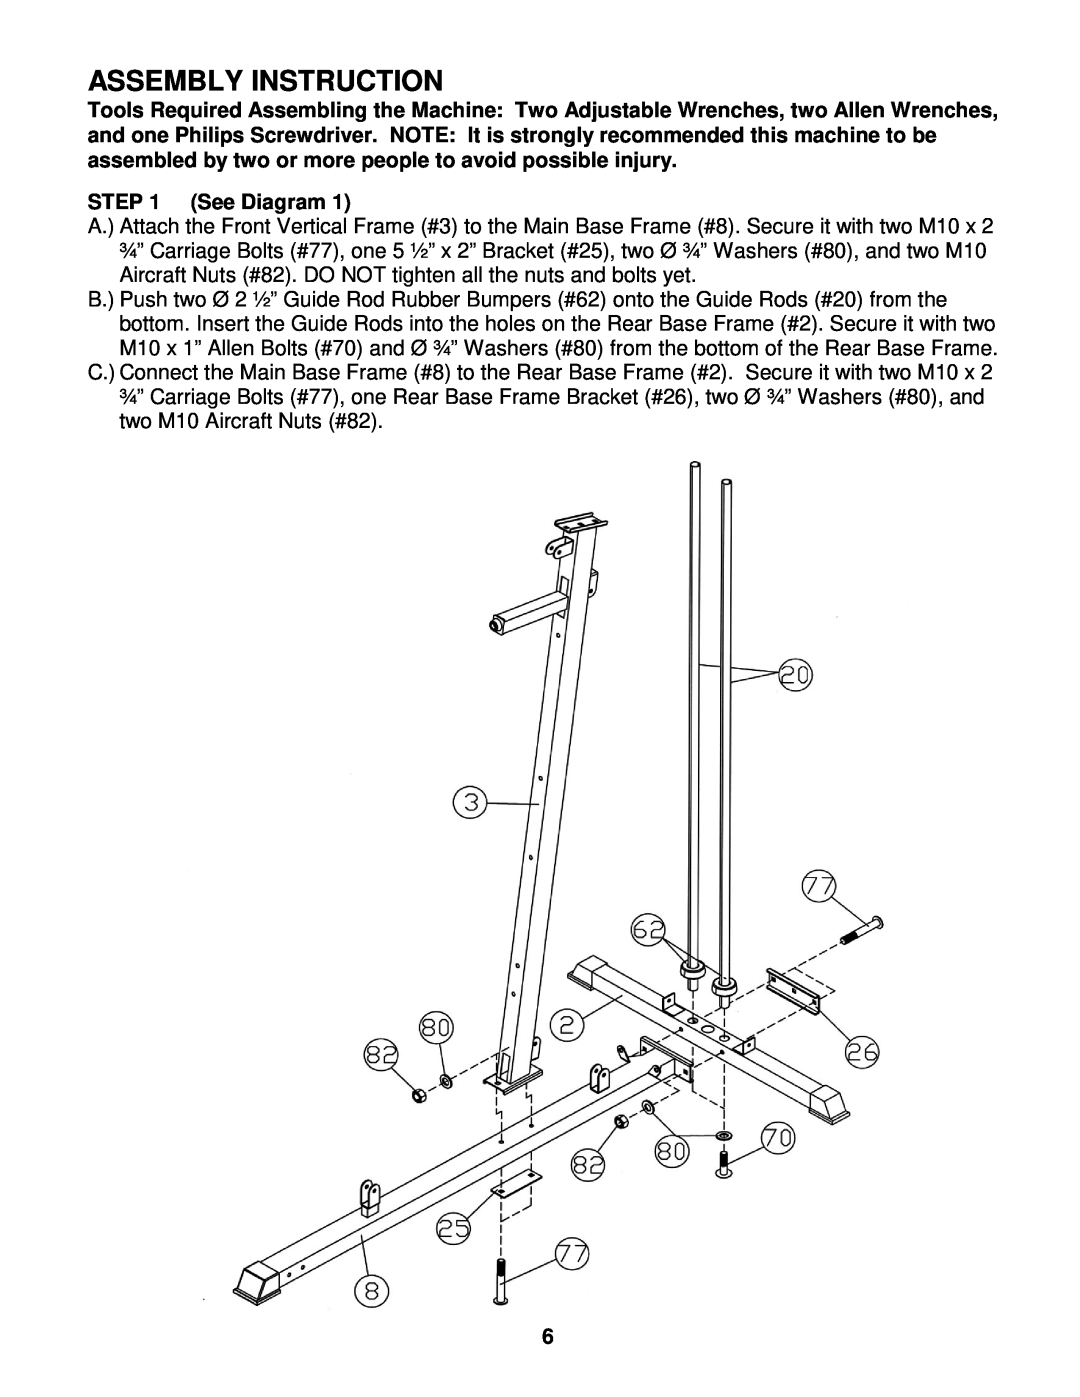 Impex WM-1501 manual Assembly Instruction 